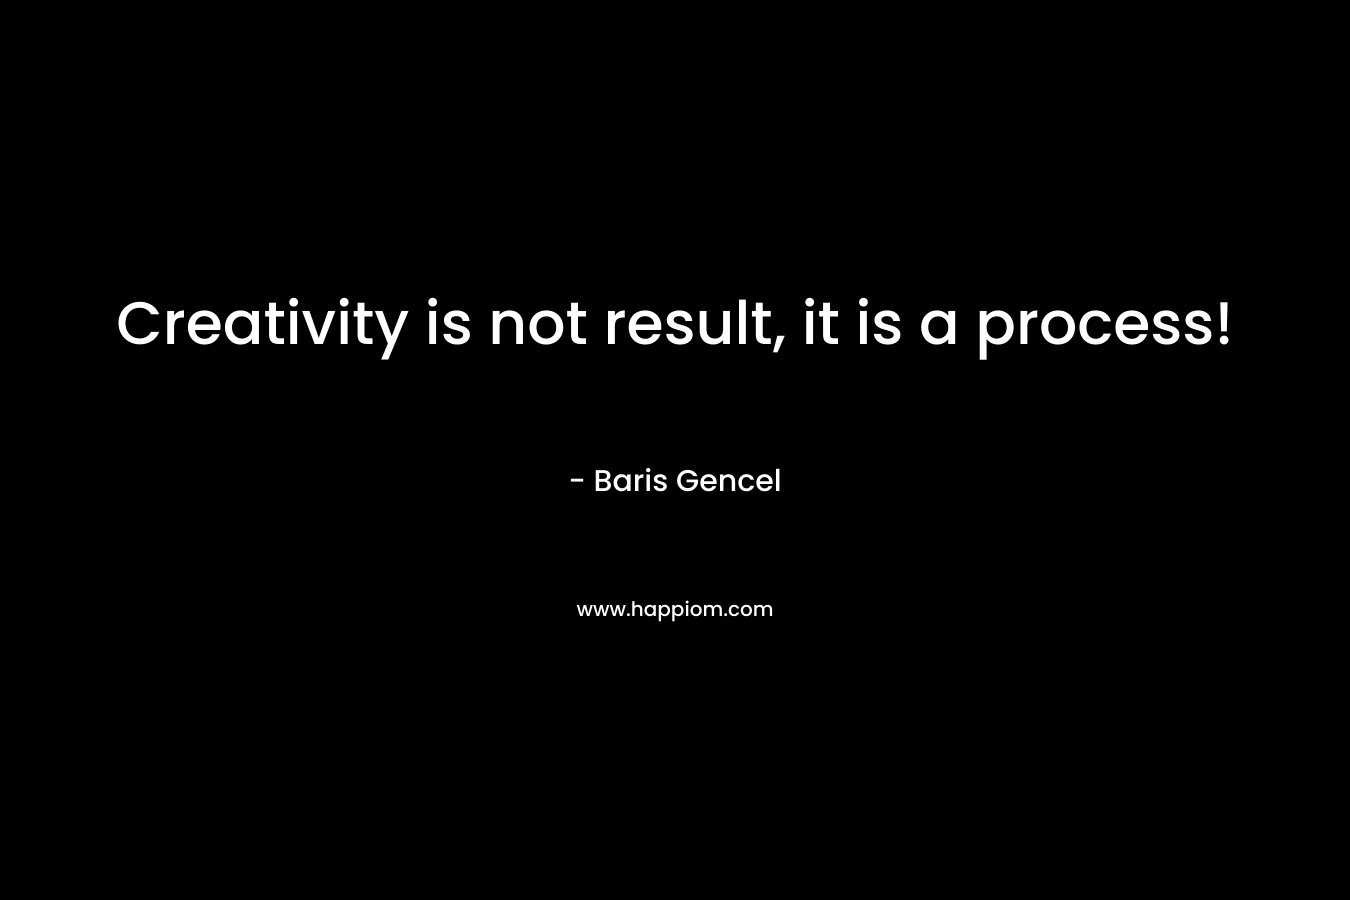 Creativity is not result, it is a process! – Baris Gencel